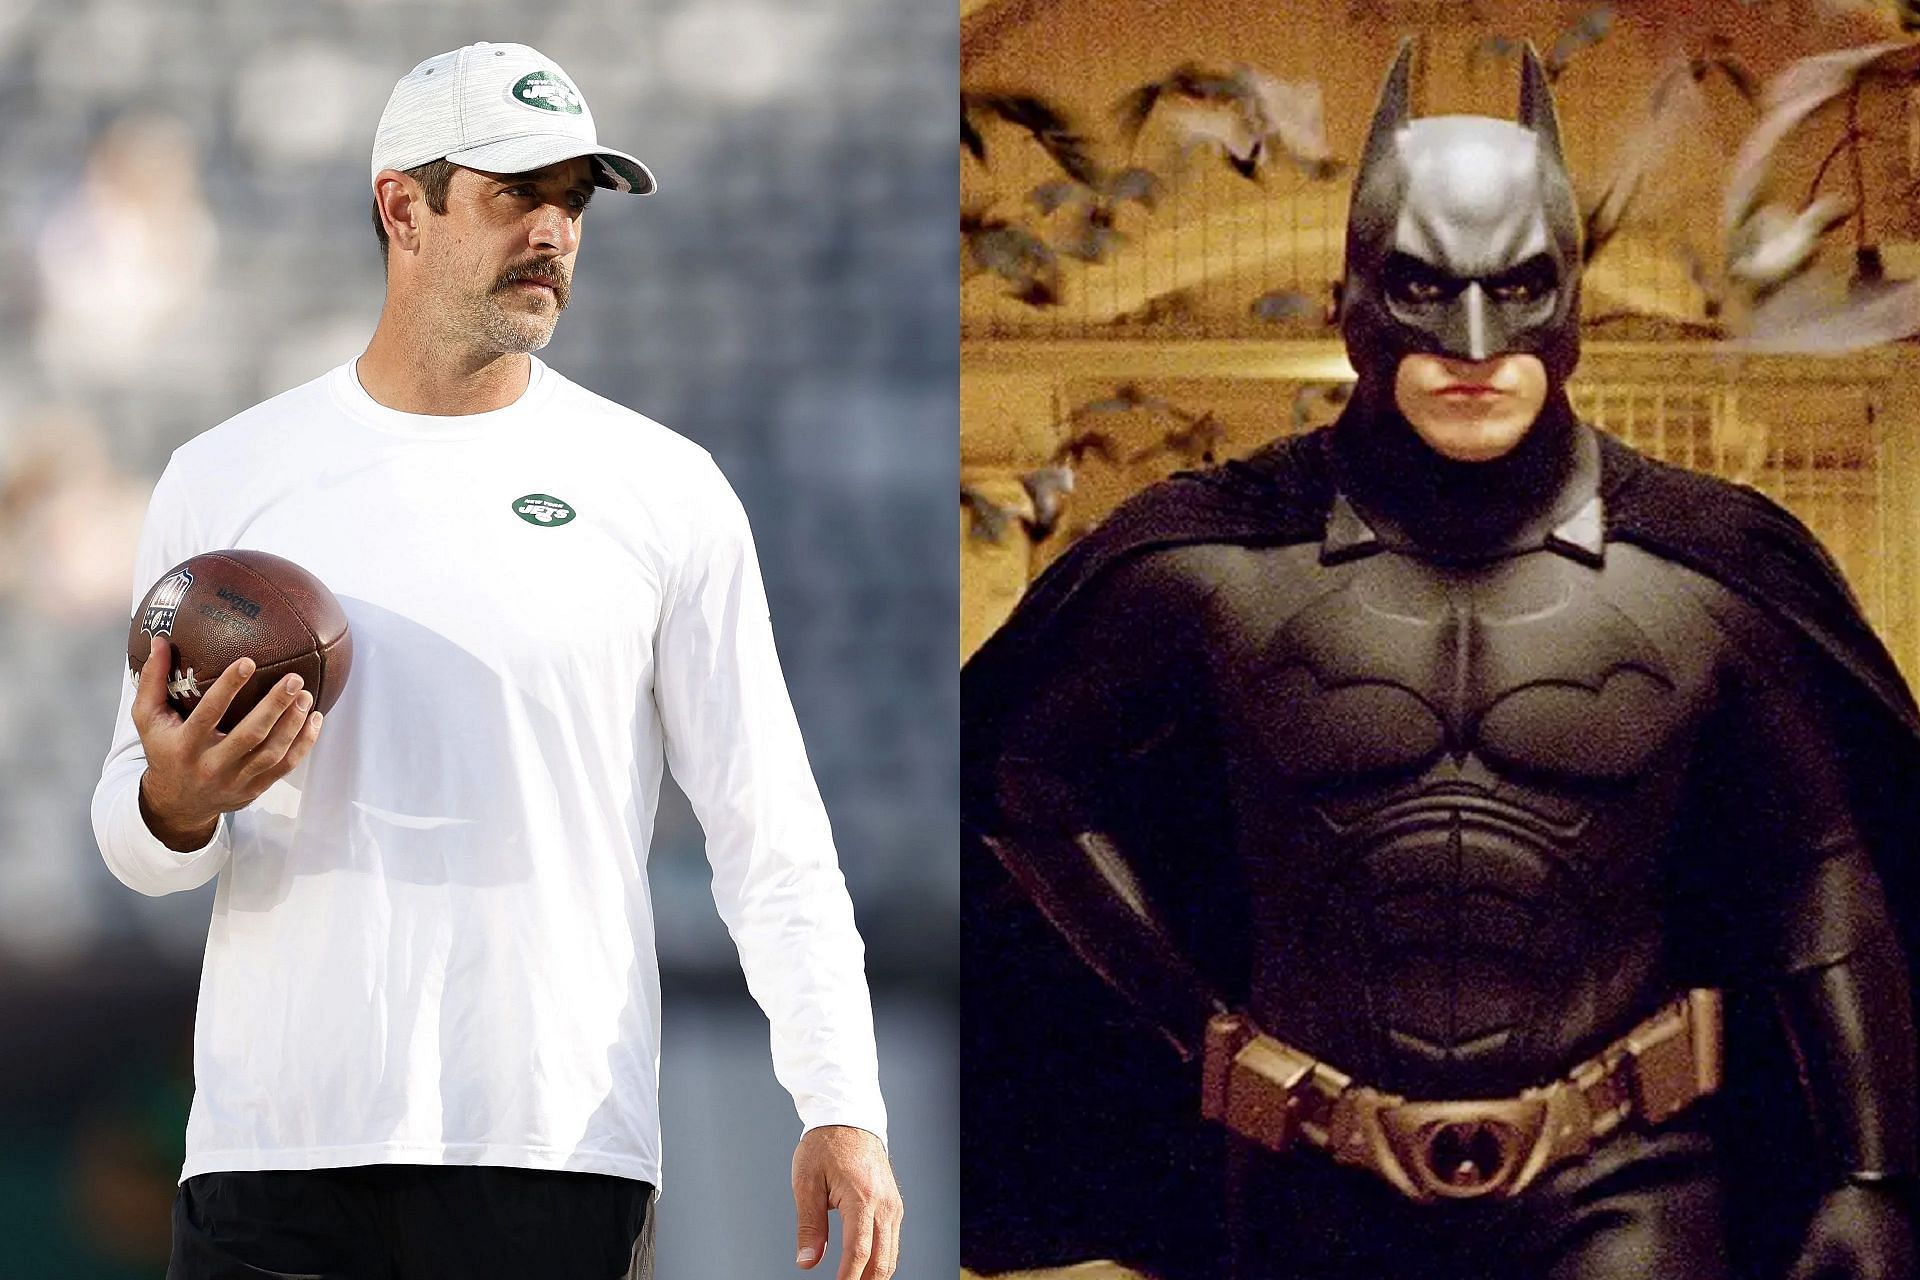 Ex-Jets QB draws parallels from Batman to lay game plan for Aaron Rodgers following Achilles injury (Photo Courtesy: Getty and Entertainment Weekly)